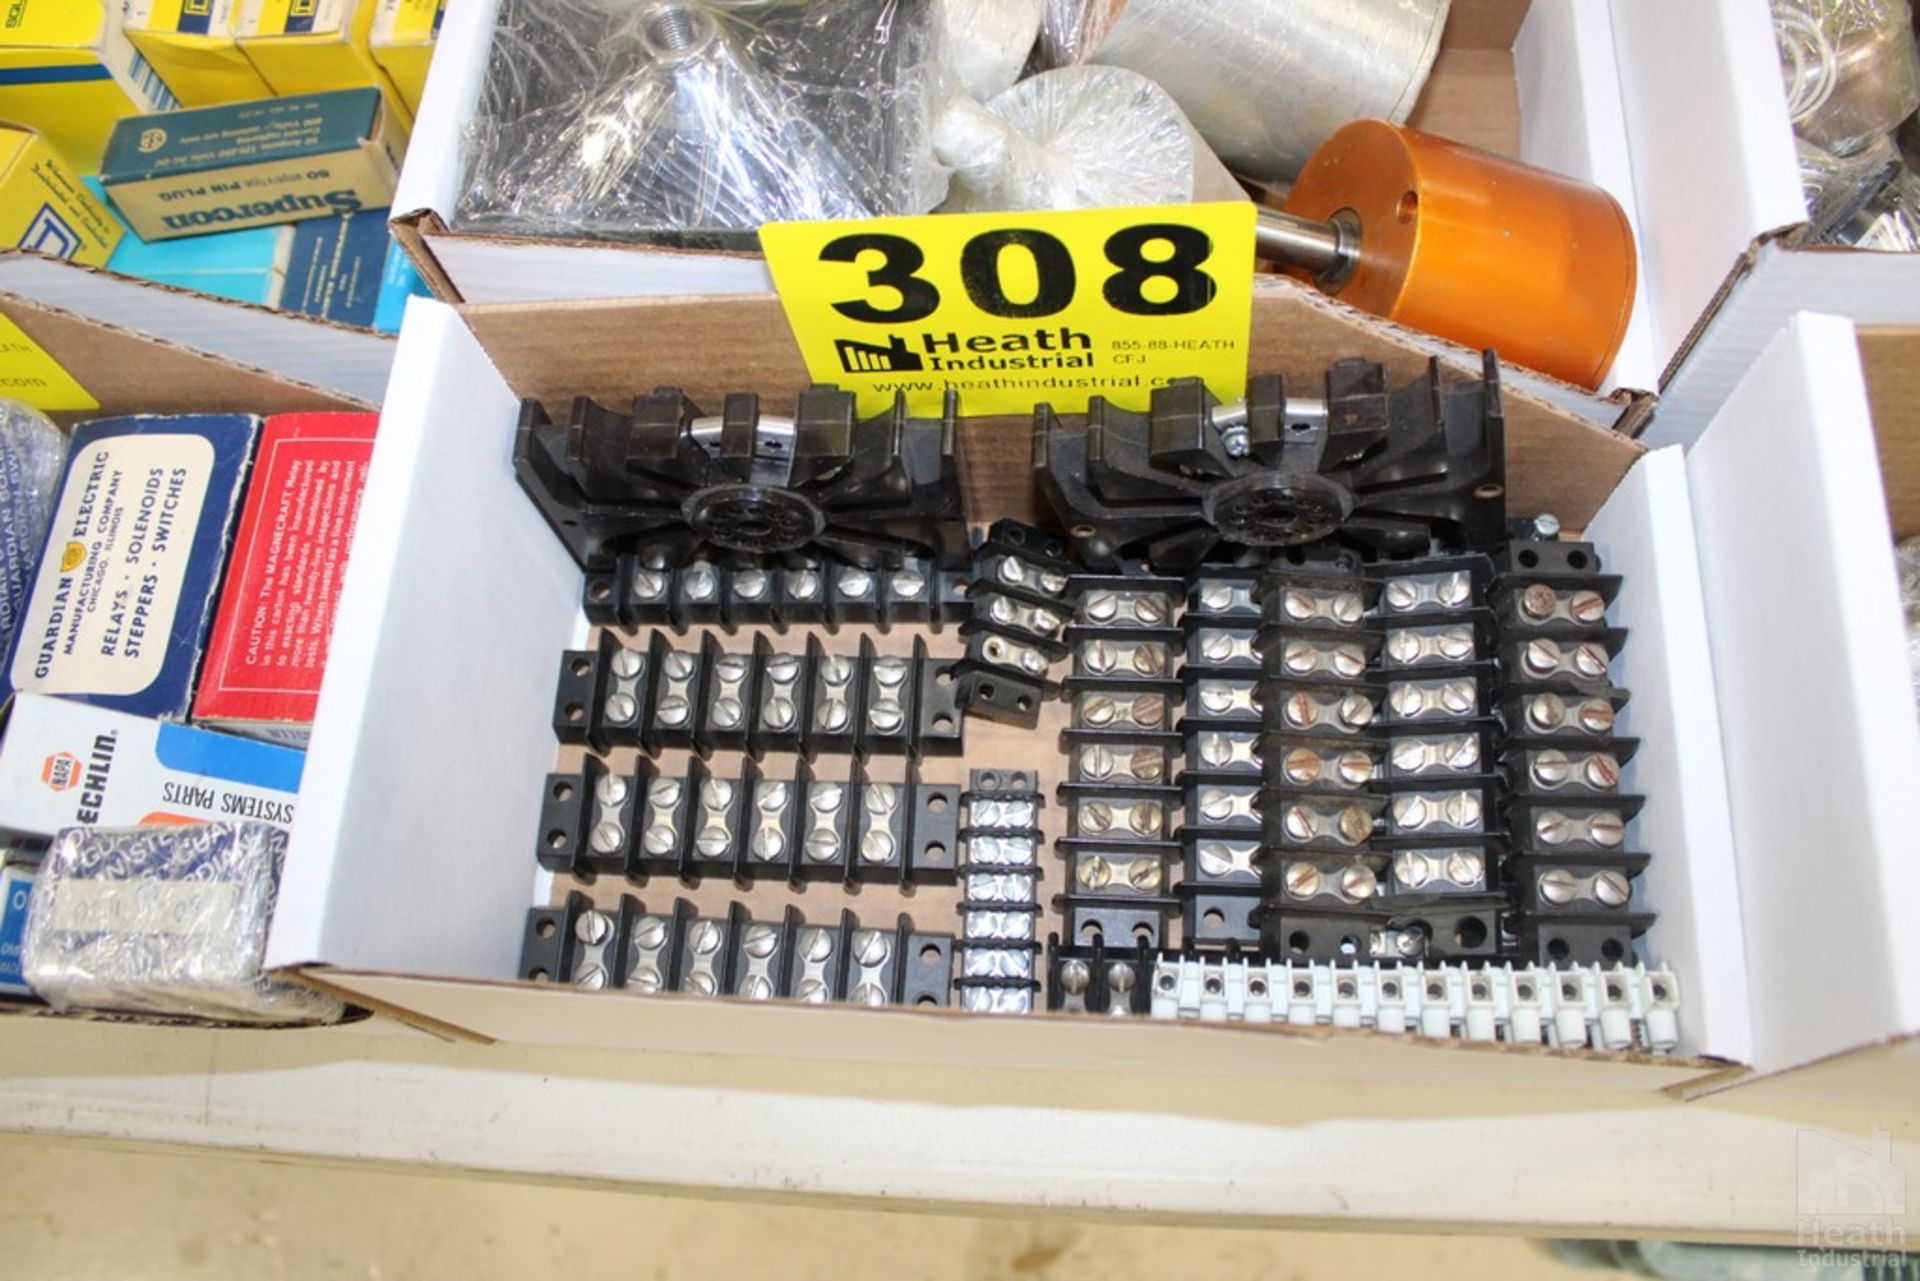 ASSORTED WIRE TERMINALS IN BOX IN BOX